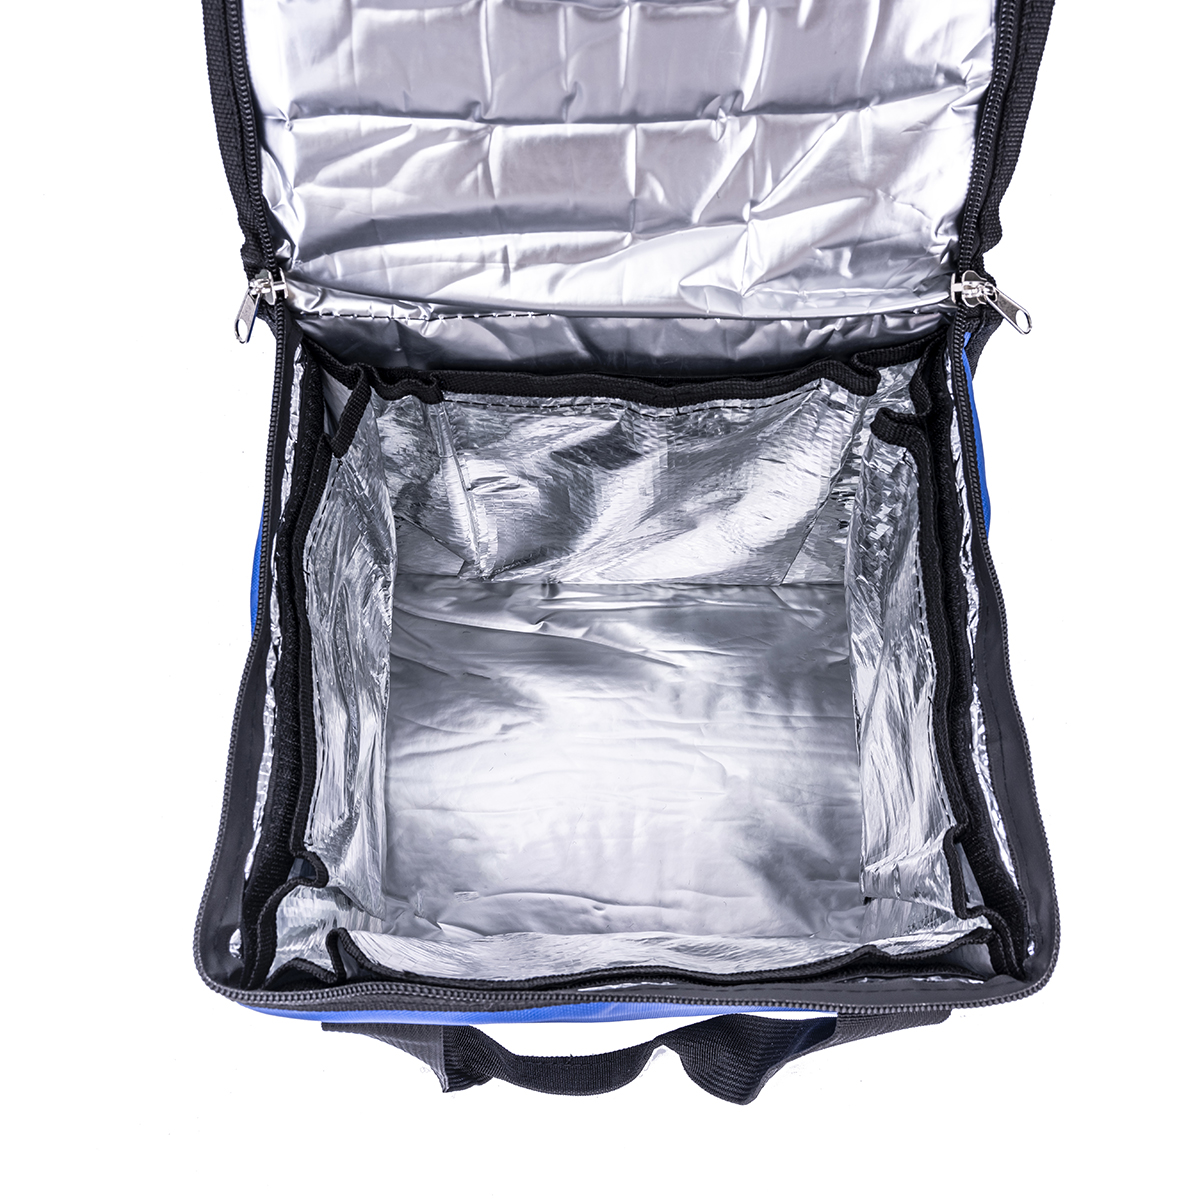 Why We Must Use Insulated Cooler Bags for Pharmaceutical Transport